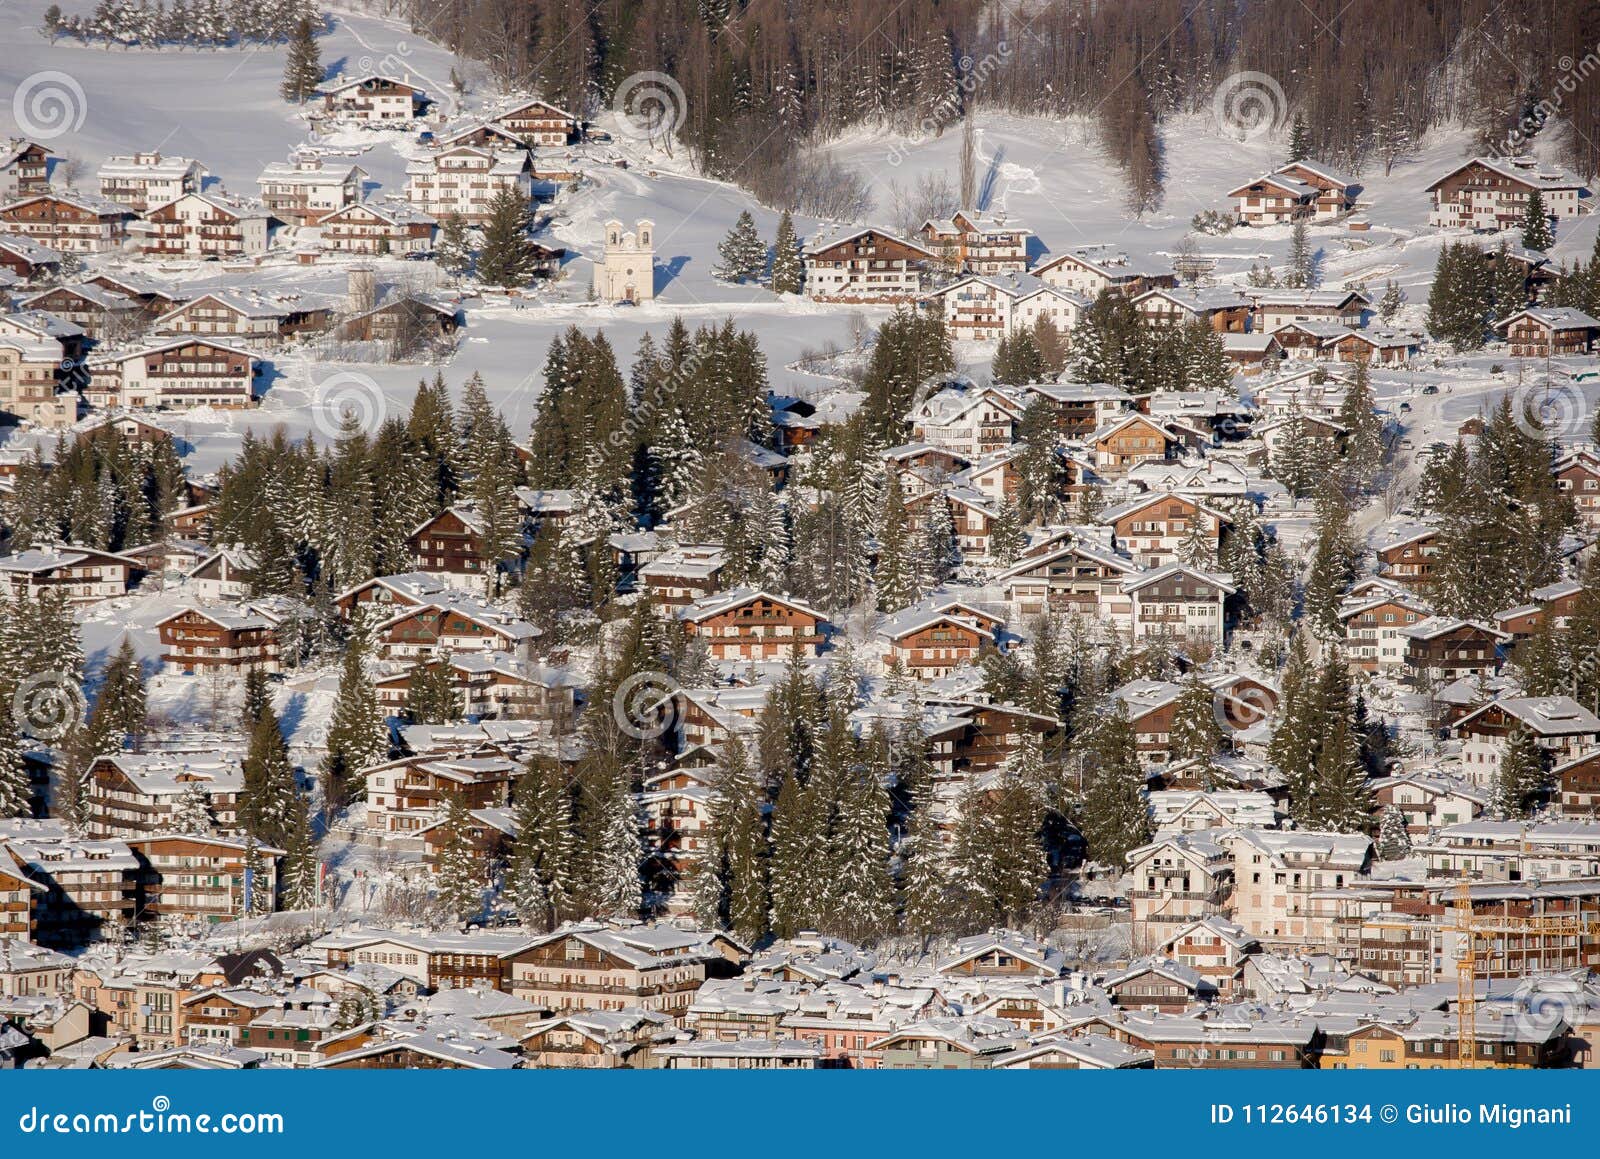 picture of the town center of cortina d`ampezzo, italy.